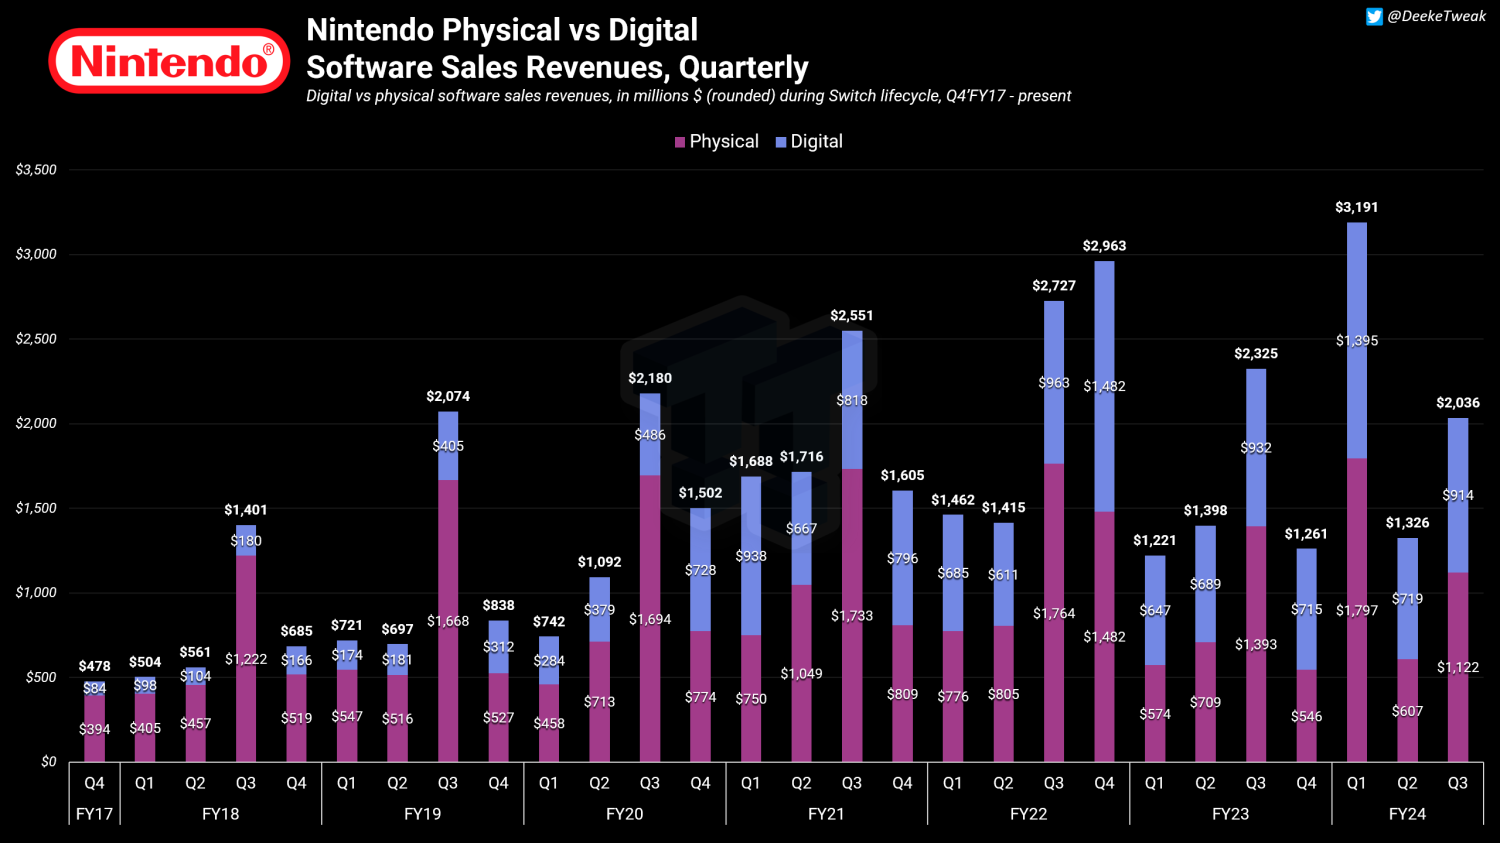 96120_15_nintendo-champions-physical-game-sales-in-latest-results_full.png